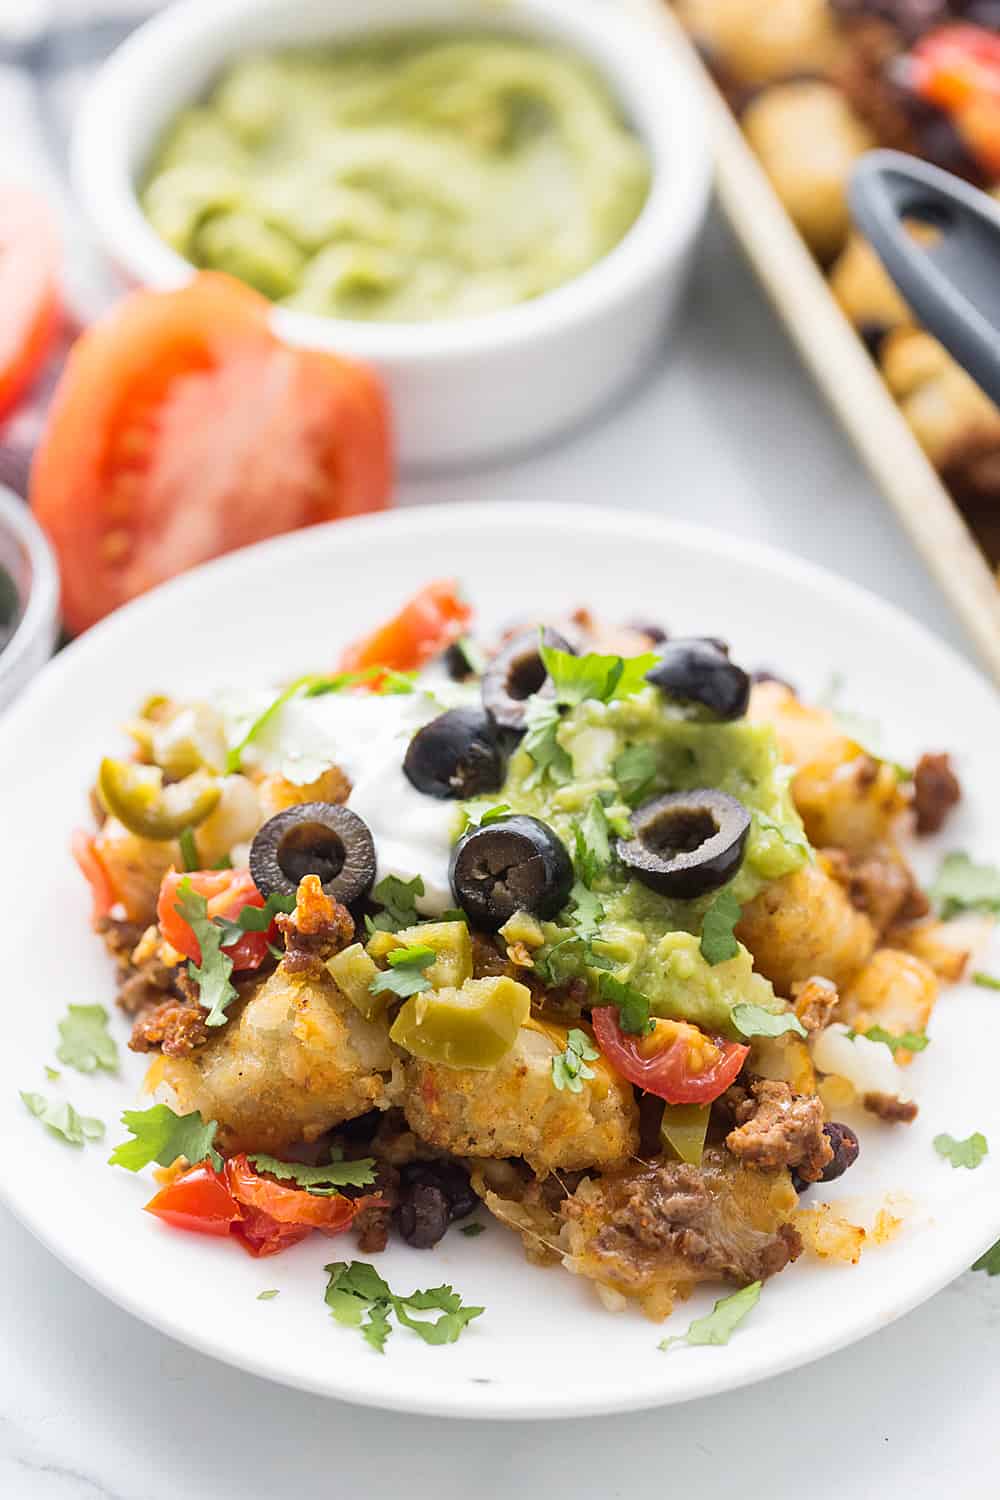 Tater Tot Nachos (Totchos) - What's better than crispy, crunch tater tots topped with oh-so-flavorful nacho fixings? Nothing! That's why tater tot nachos, aka totchos, are always a hit! #nachos #tatertots #tatertotcasserole #appetizer #baking #cooking #easyrecipe #halfscratched #tatertotnachos #mexicanfood